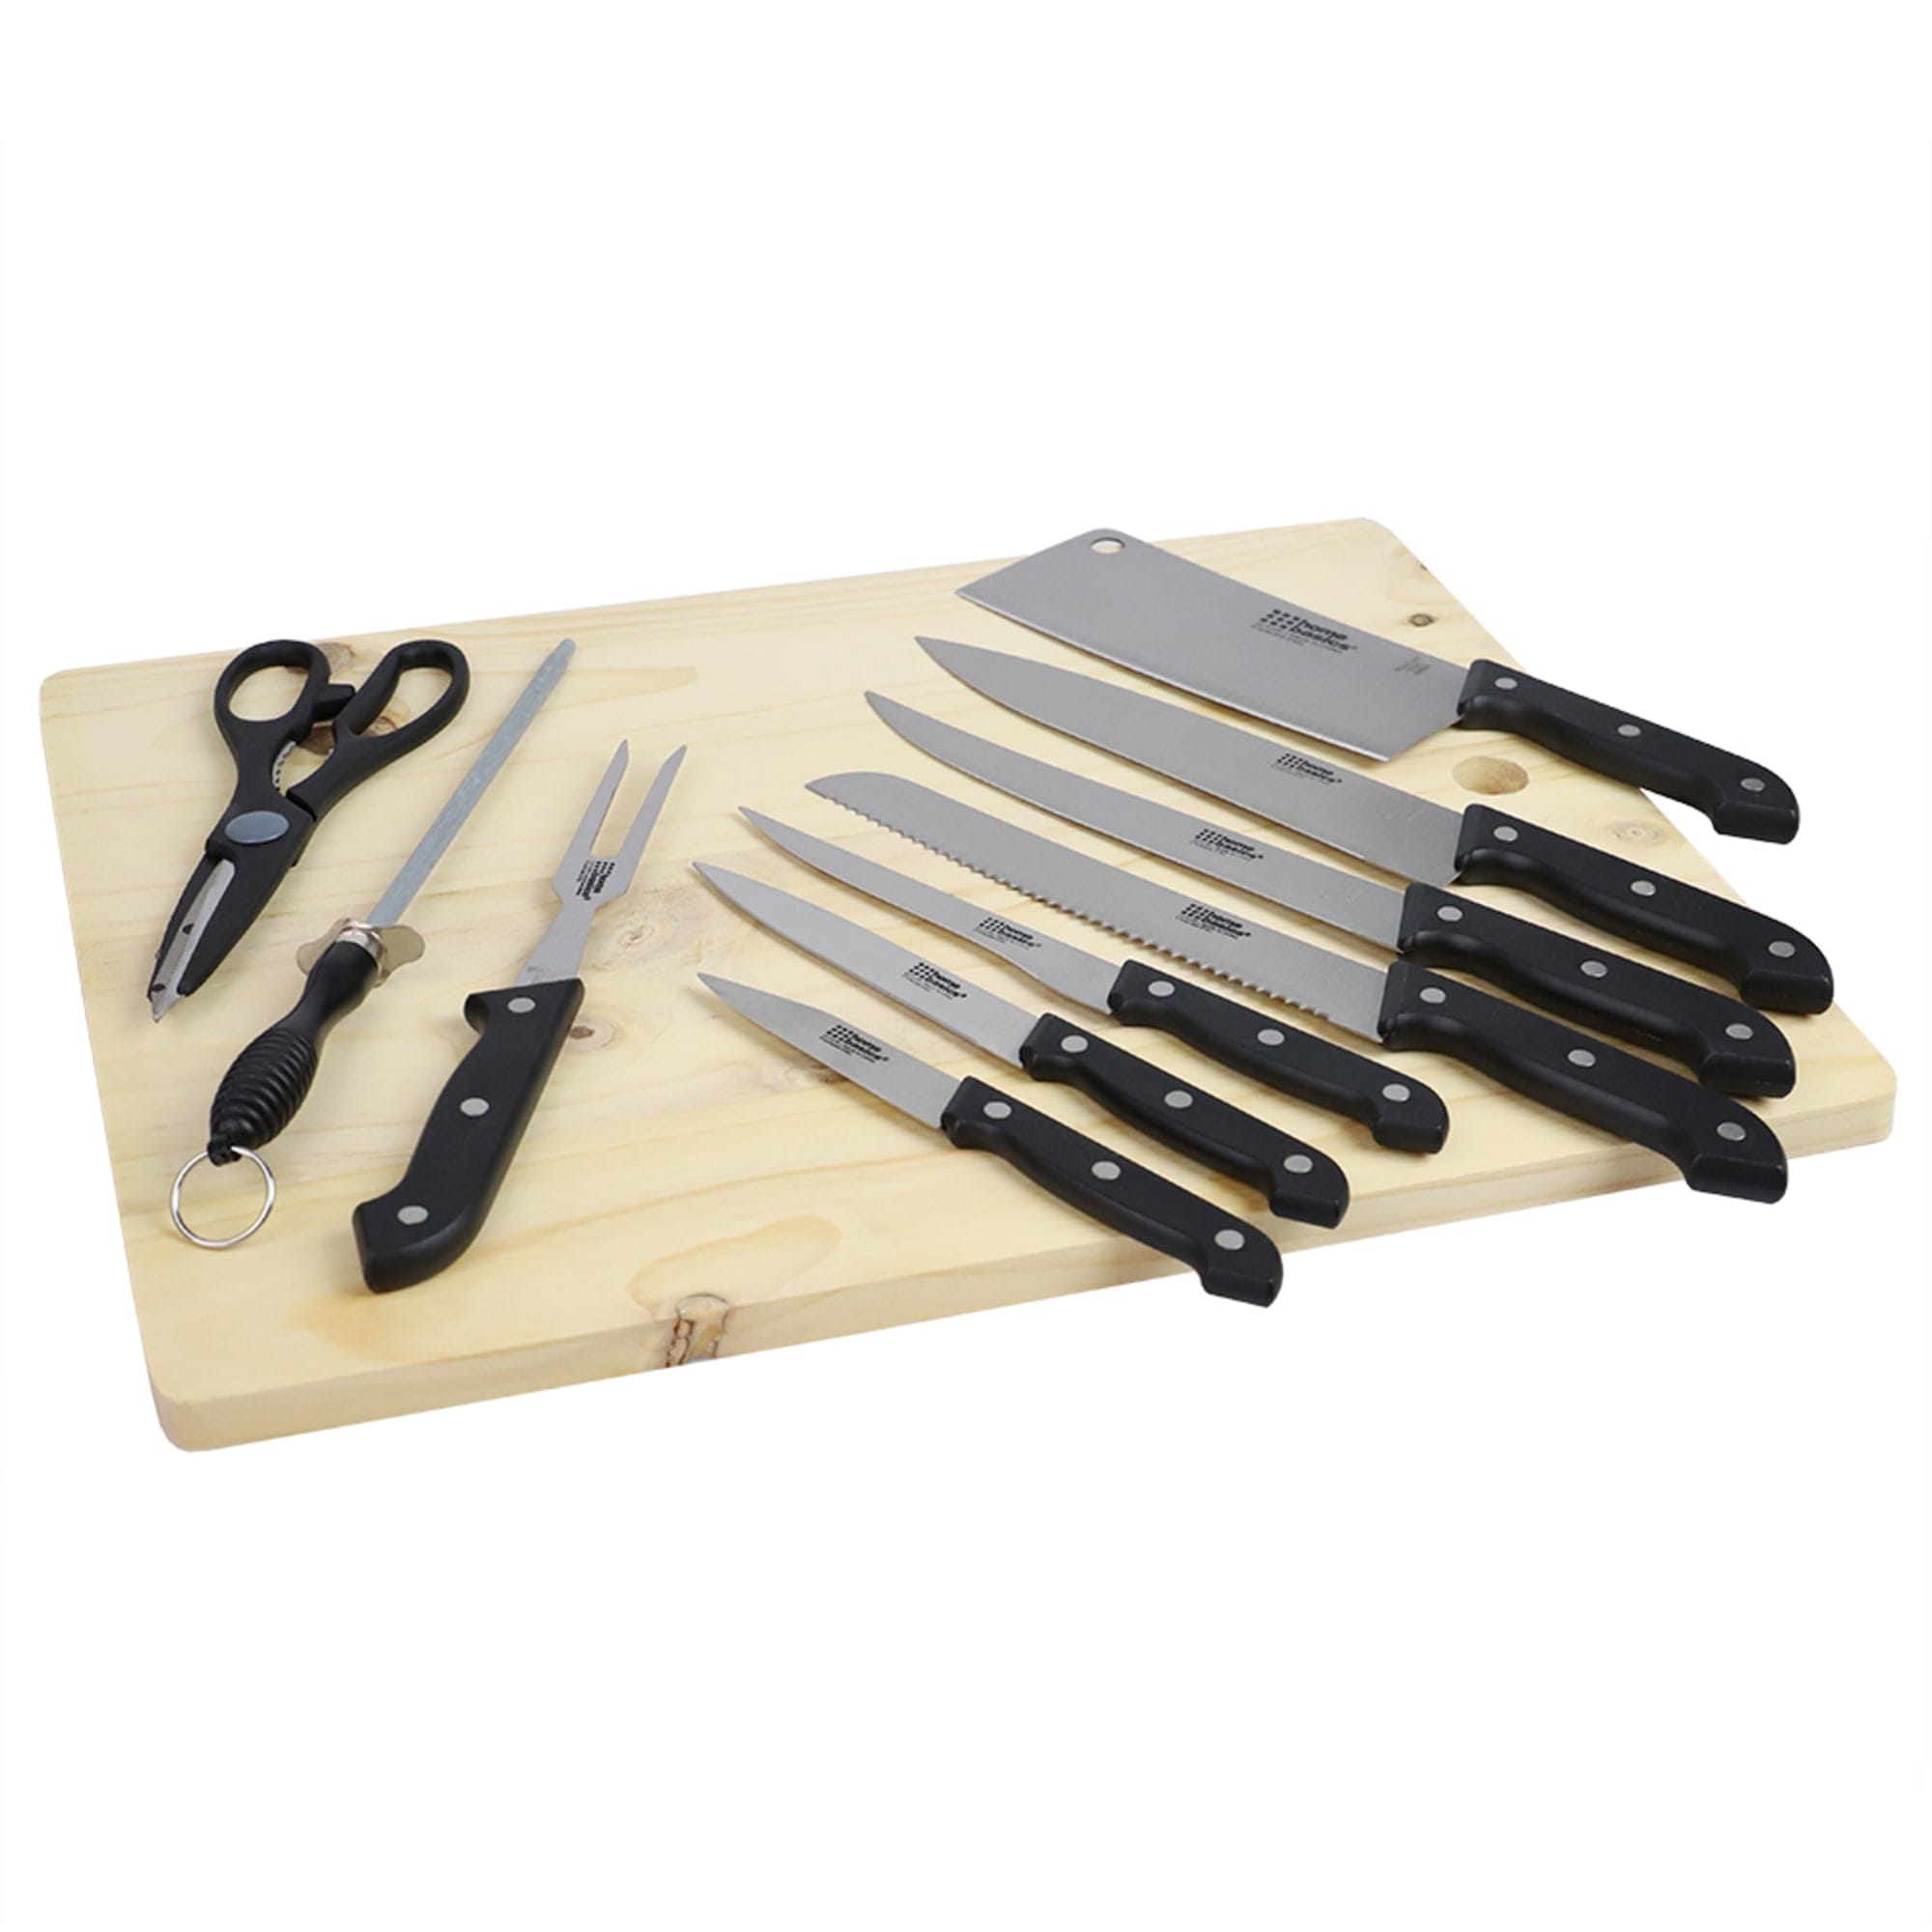 Home Basics 10 Piece Knife Set with Cutting Board $10.00 EACH, CASE PACK OF 6